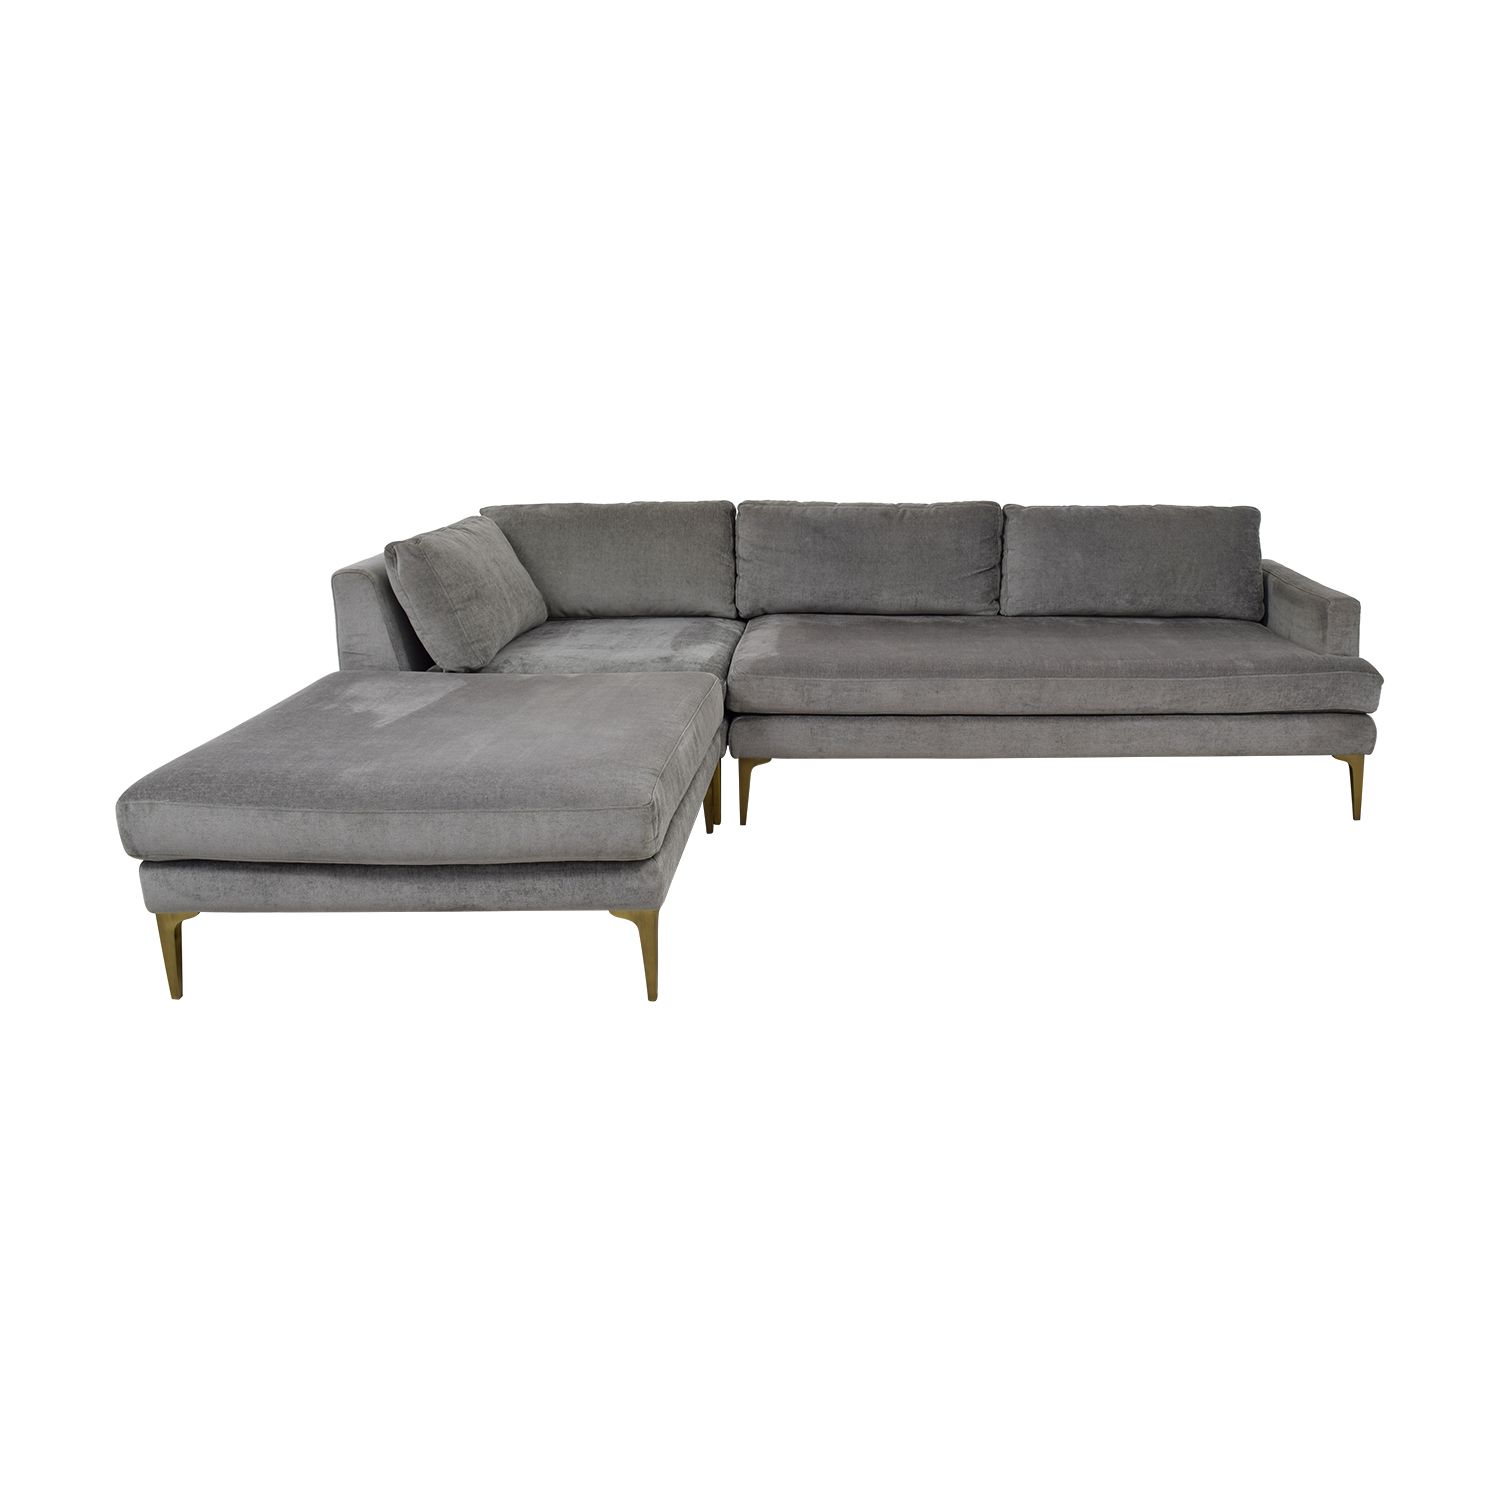 44% Off – West Elm West Elm Andes Interchangeable Ottoman For West Elm Sectional Sofas (View 13 of 15)